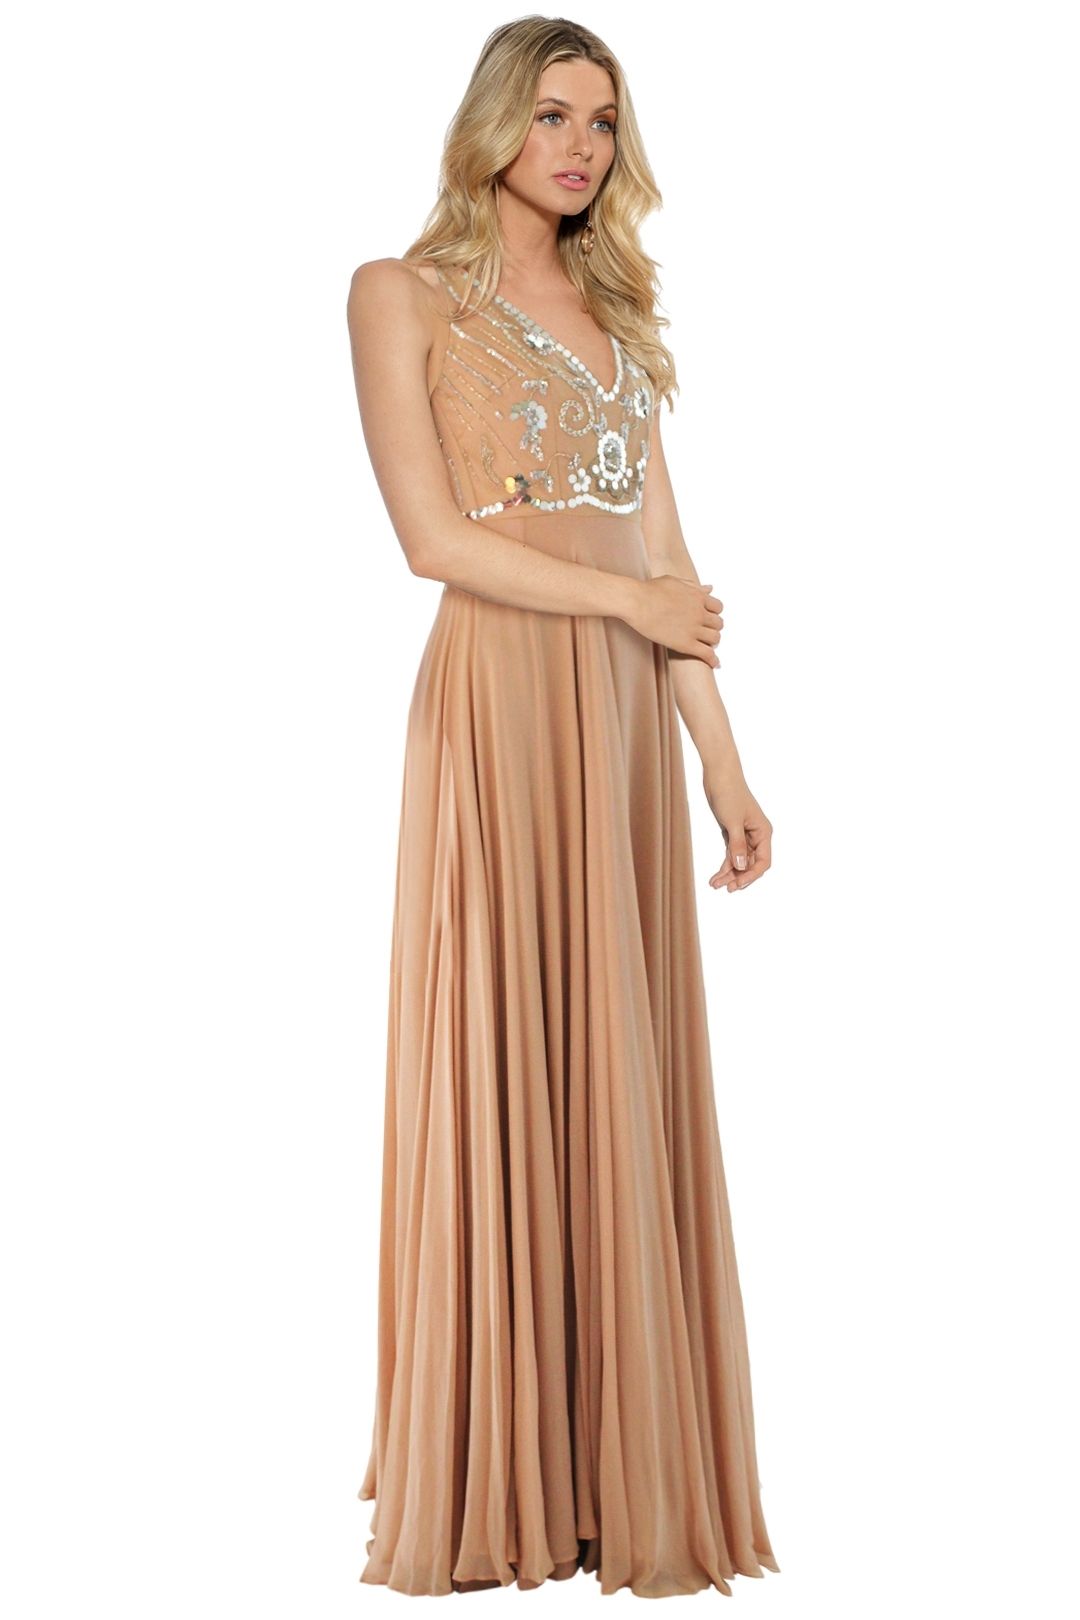 Alex Perry - Luna Gown - Pink - Side